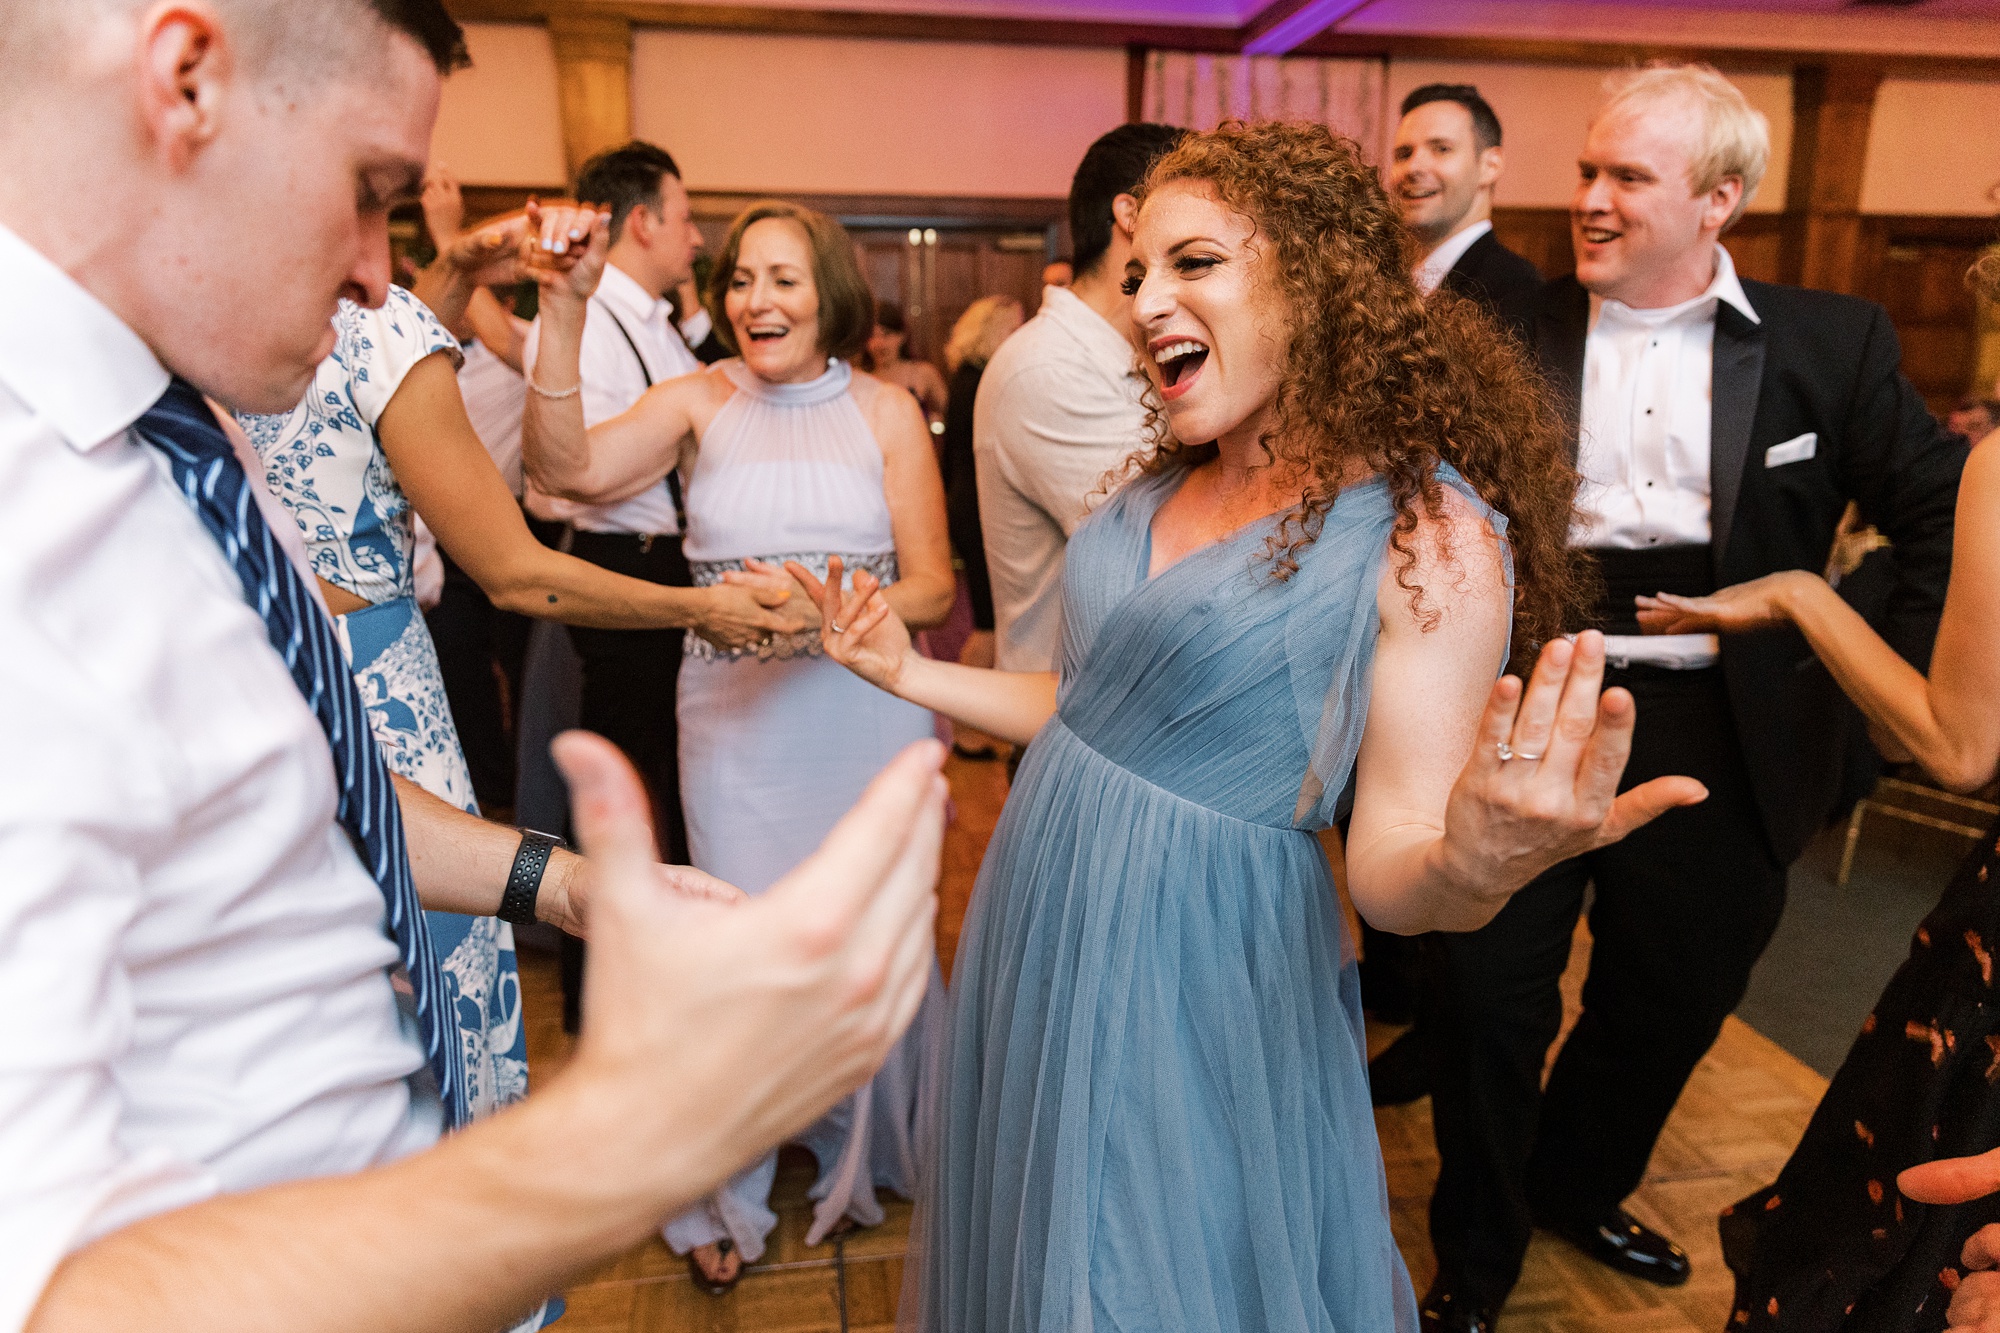 wedding guests dance during wedding reception at Skytop Lodge with live band